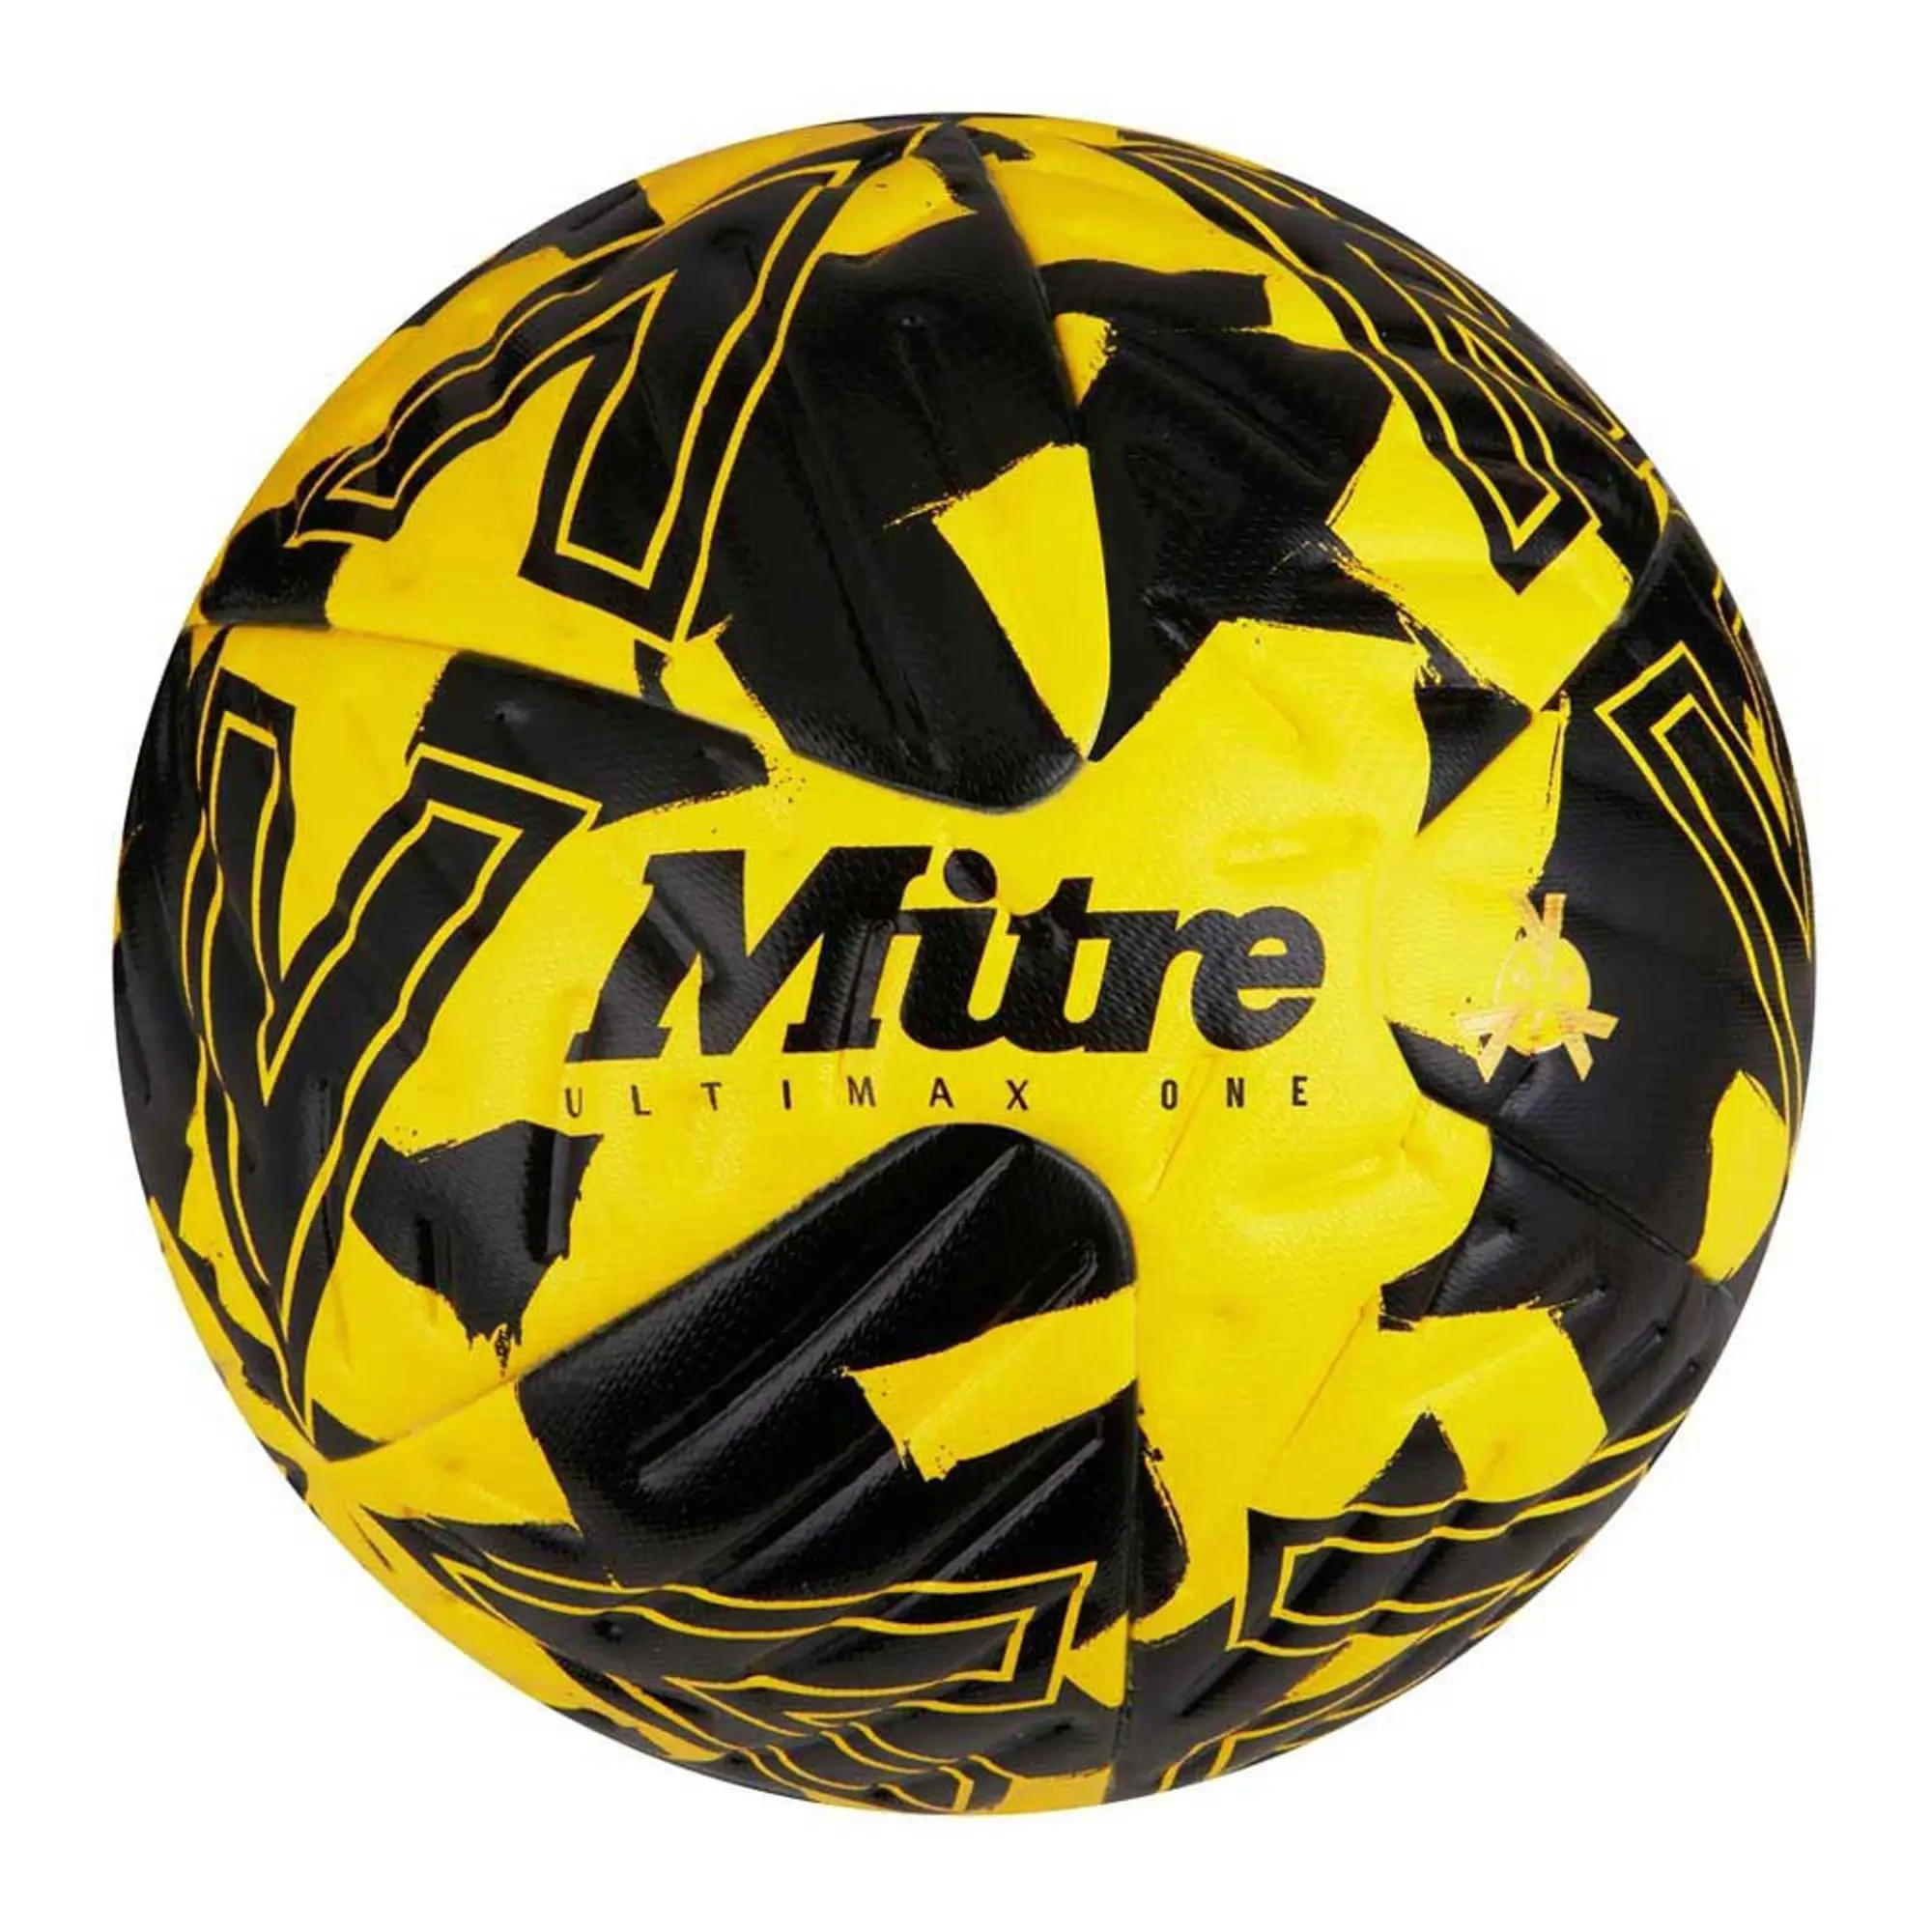 Mitre Ultimax One 23